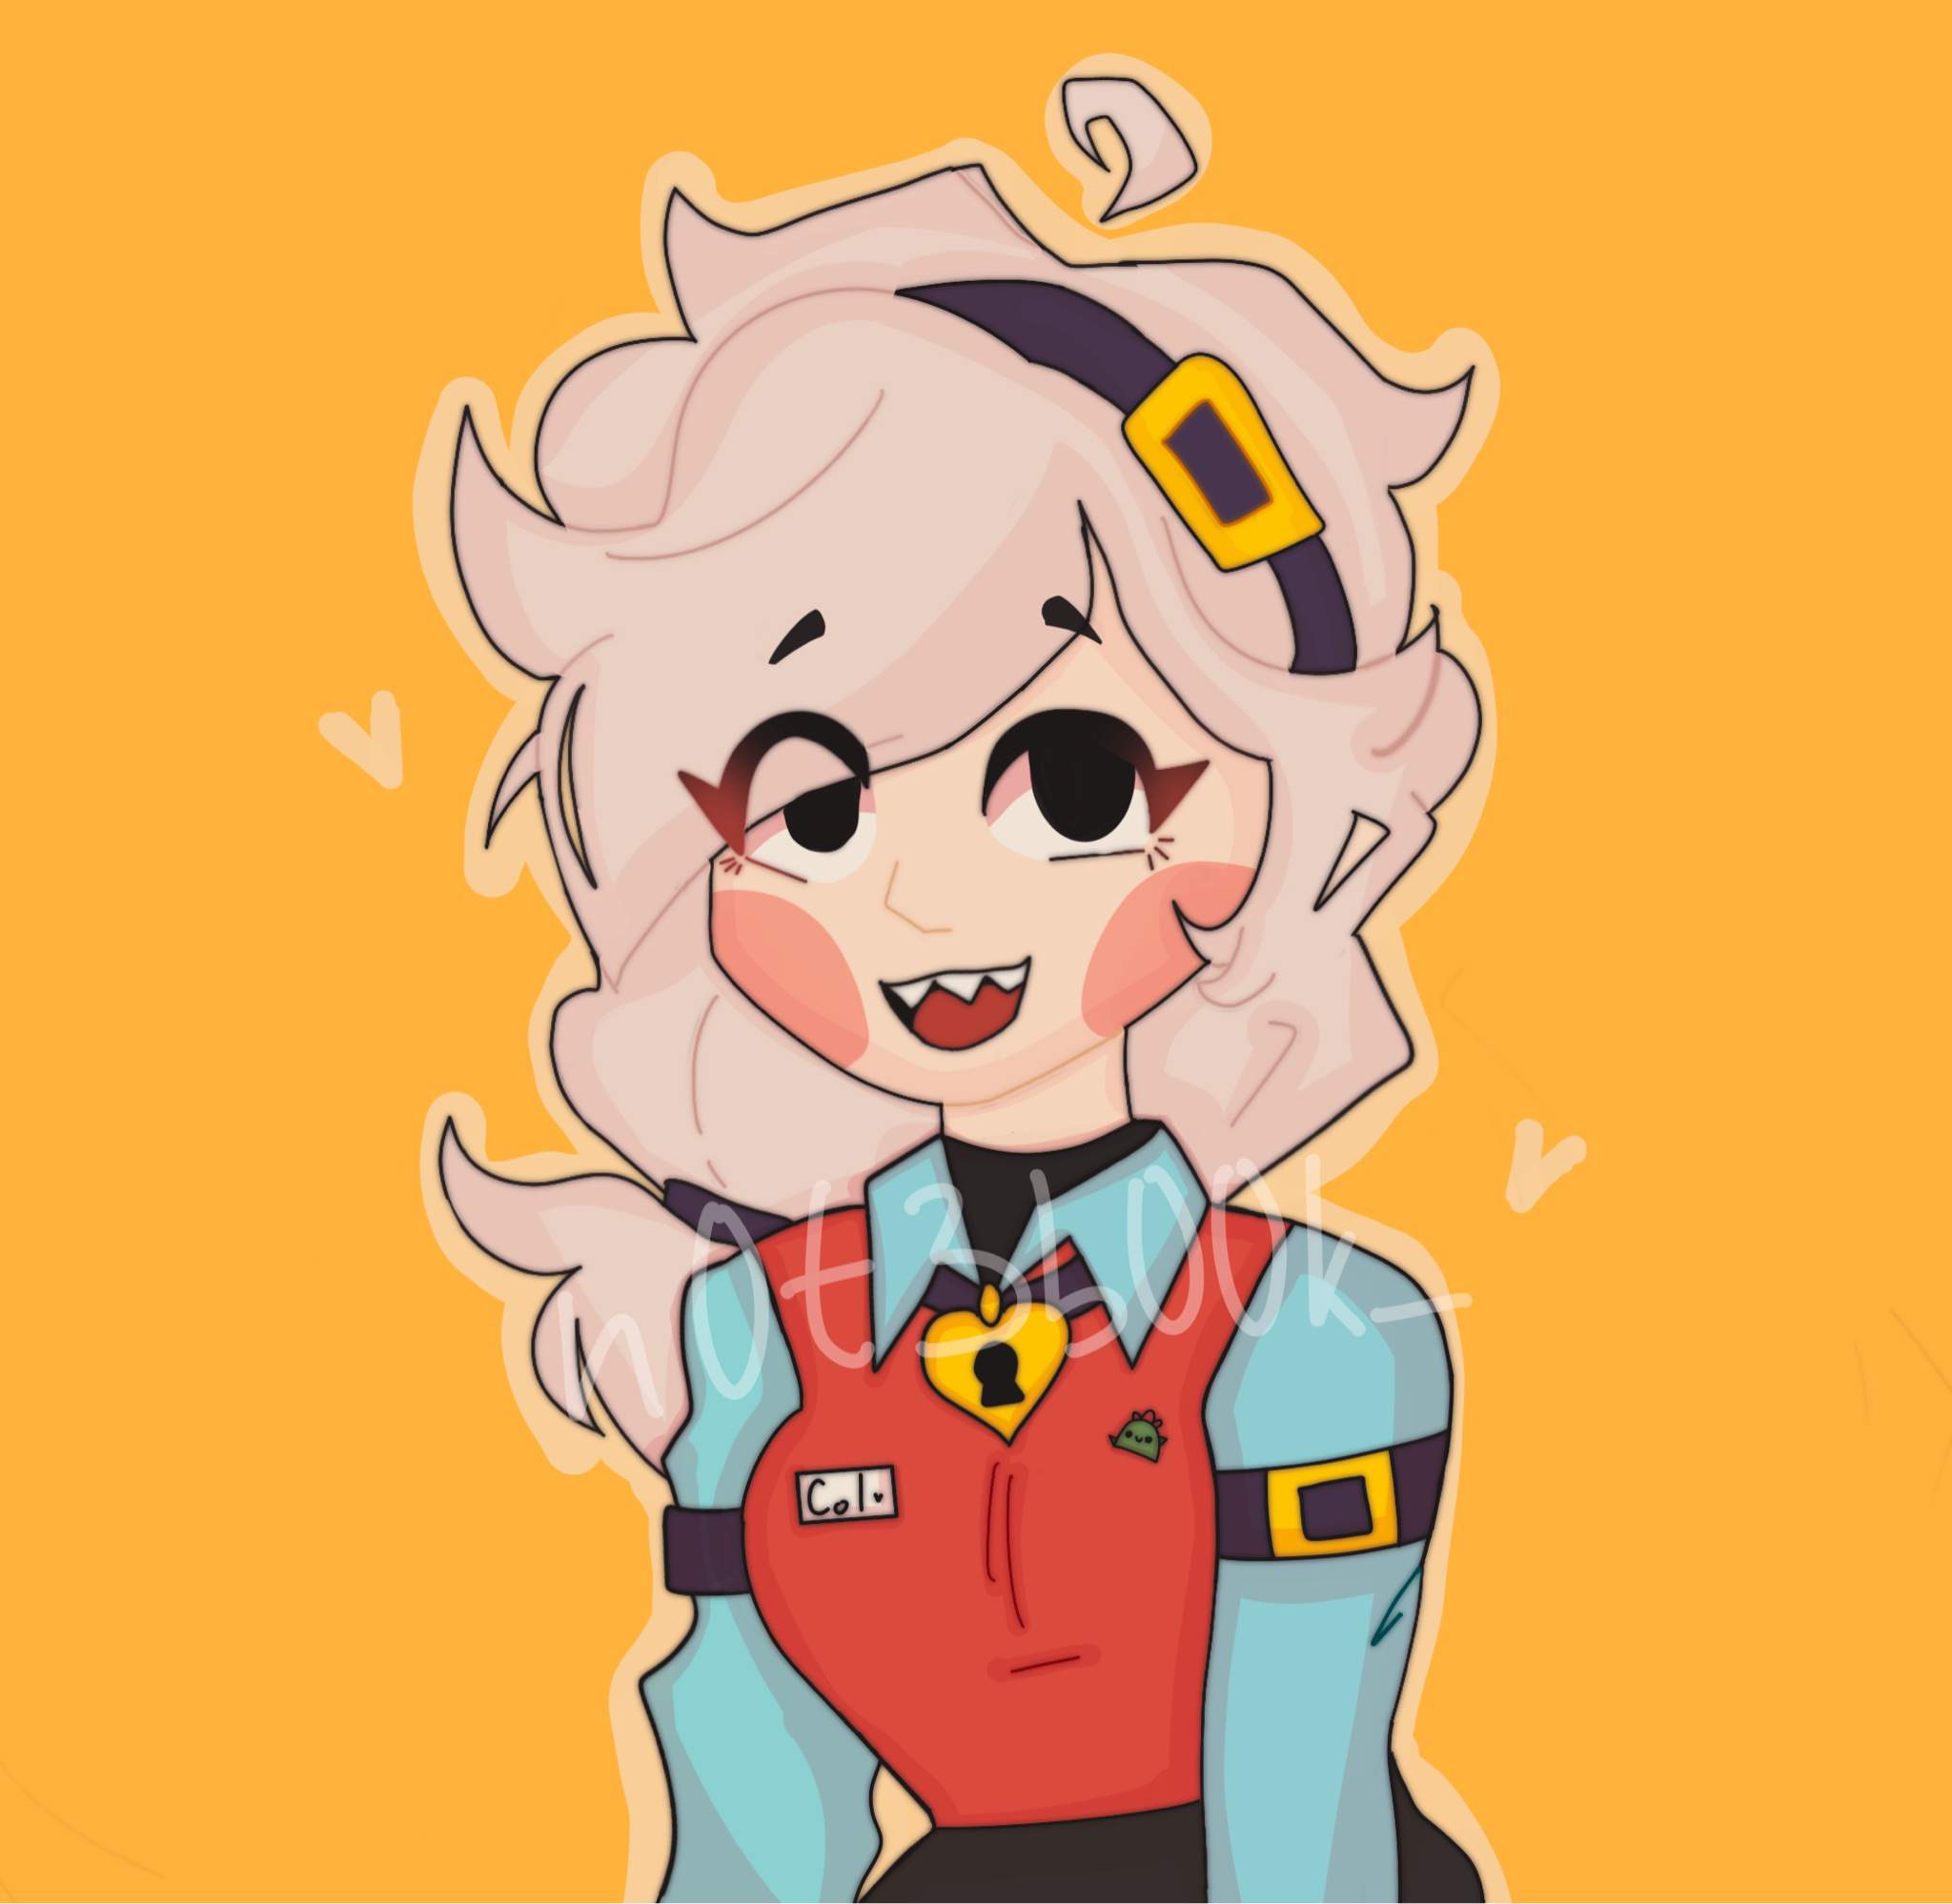 Colette w a new hairstyle (once again) | Brawl Stars Amino